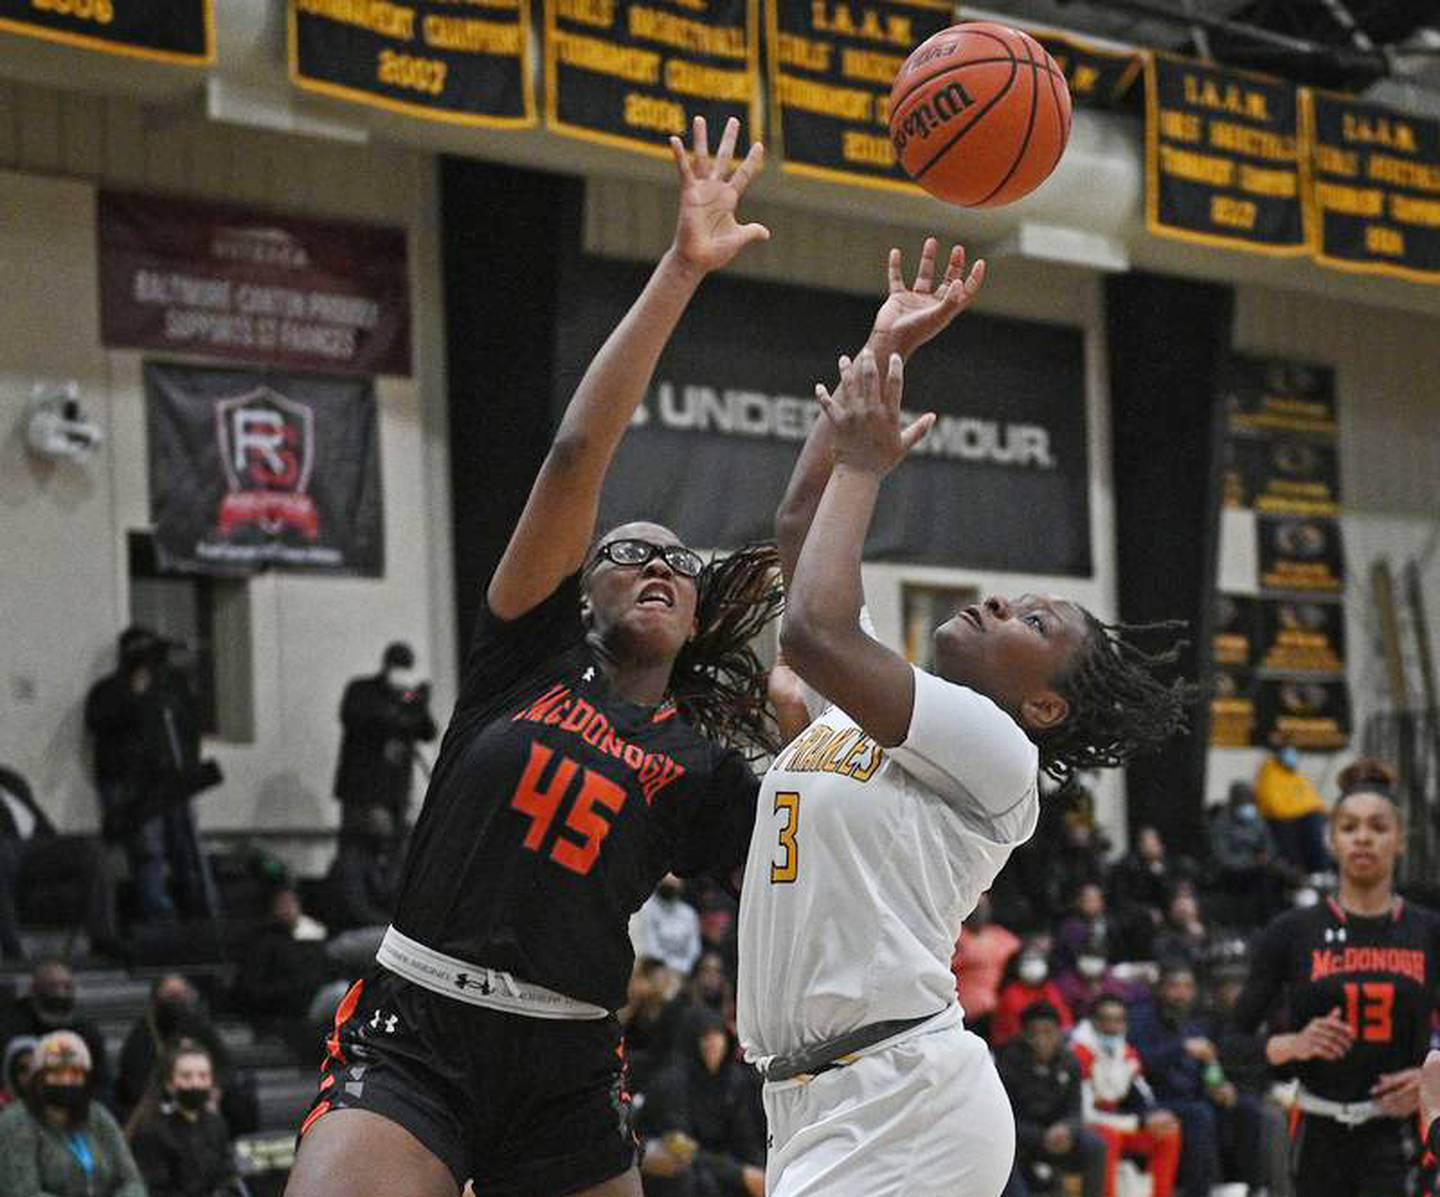 McDonogh's Kennedy Umeh (left), an all-around superstar, displays her defensive prowess in a contest against St. Frances last season.